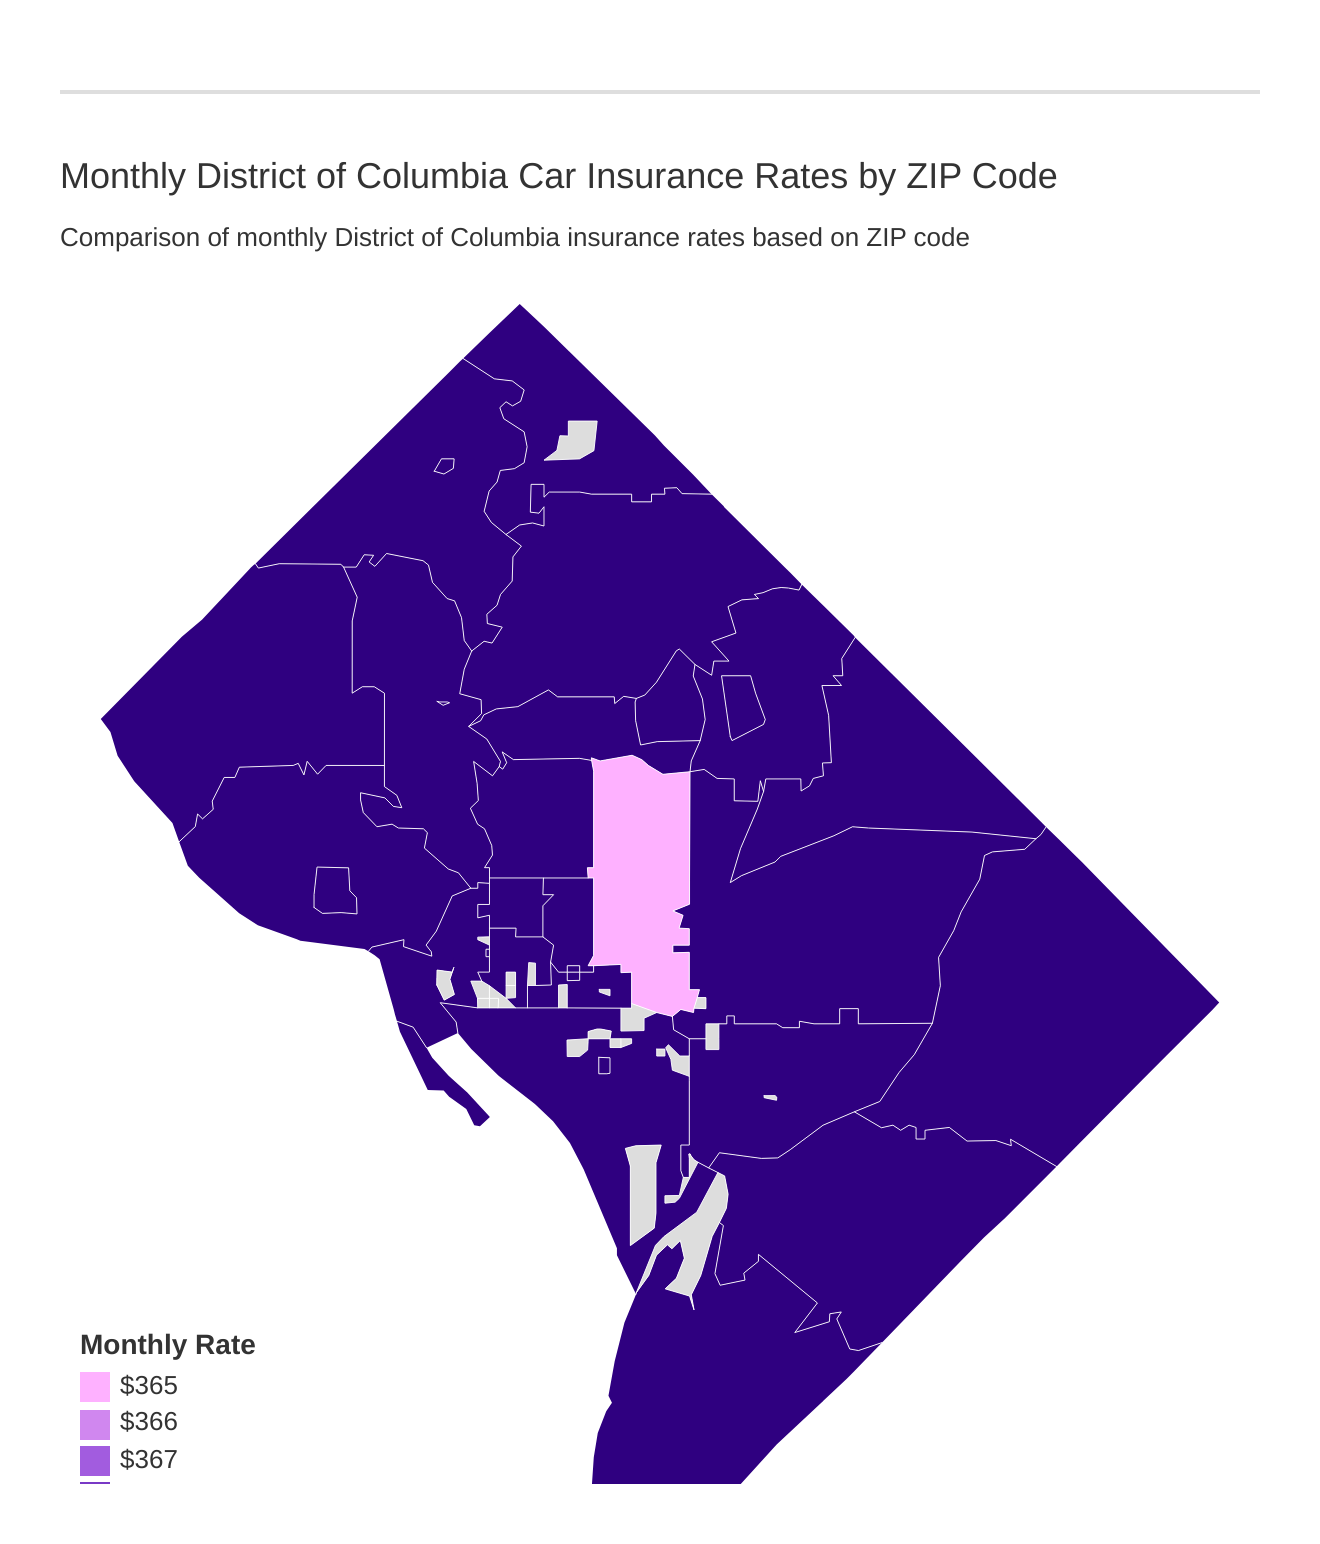 Monthly District of Columbia Car Insurance Rates by ZIP Code